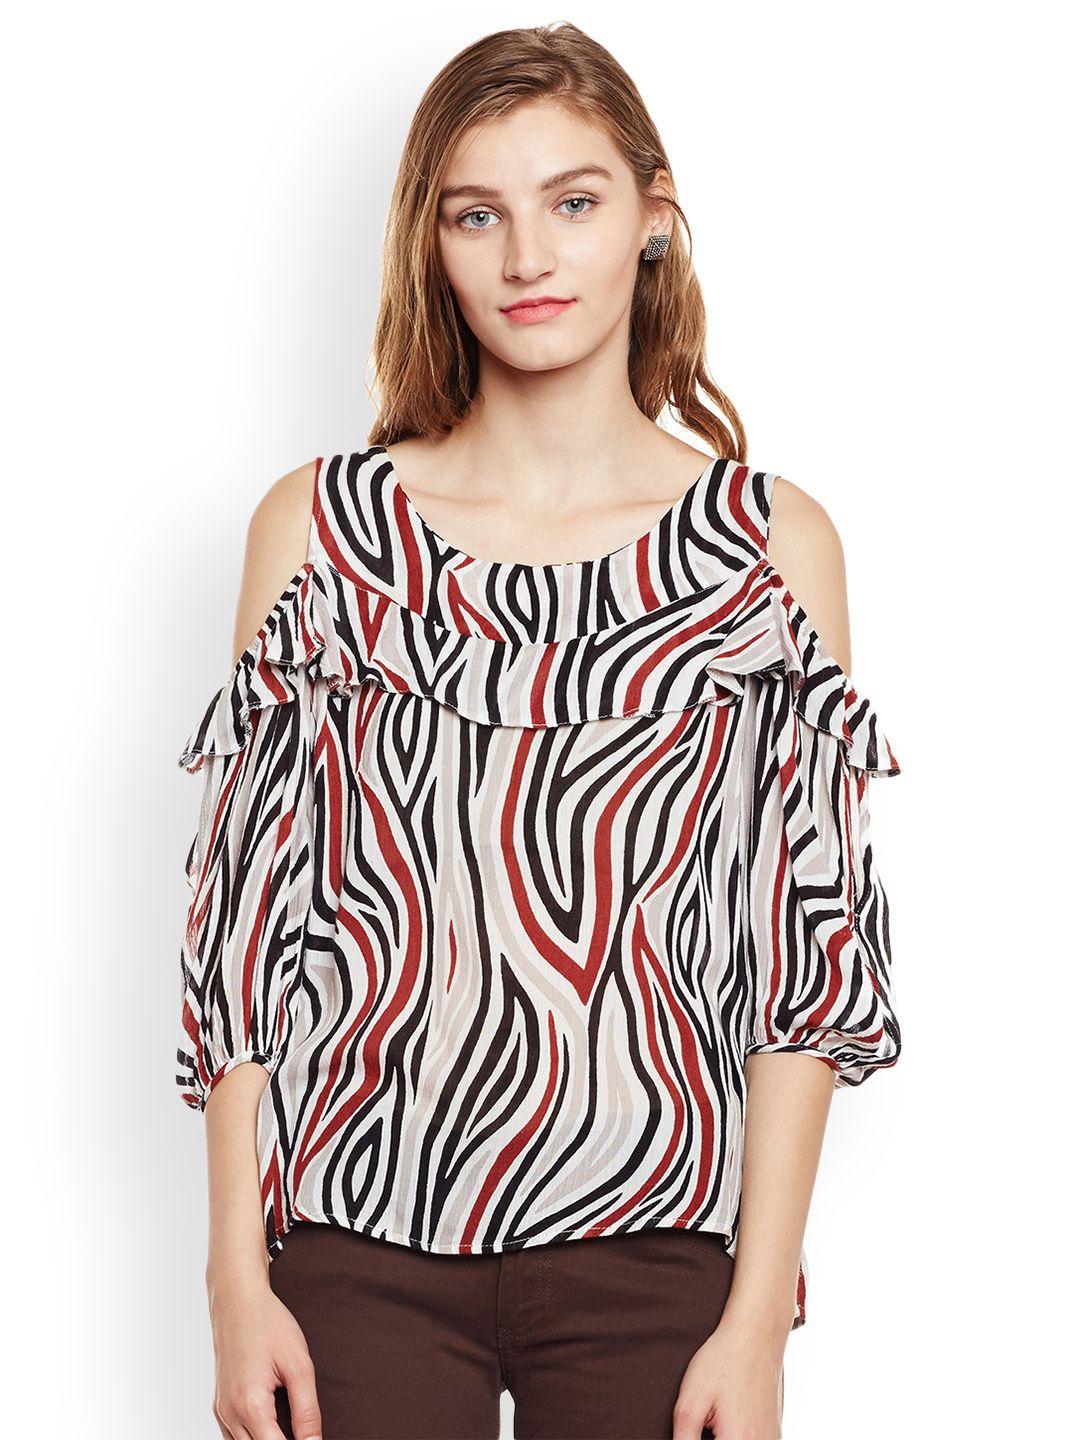 oxolloxo women off-white printed cold shoulder top